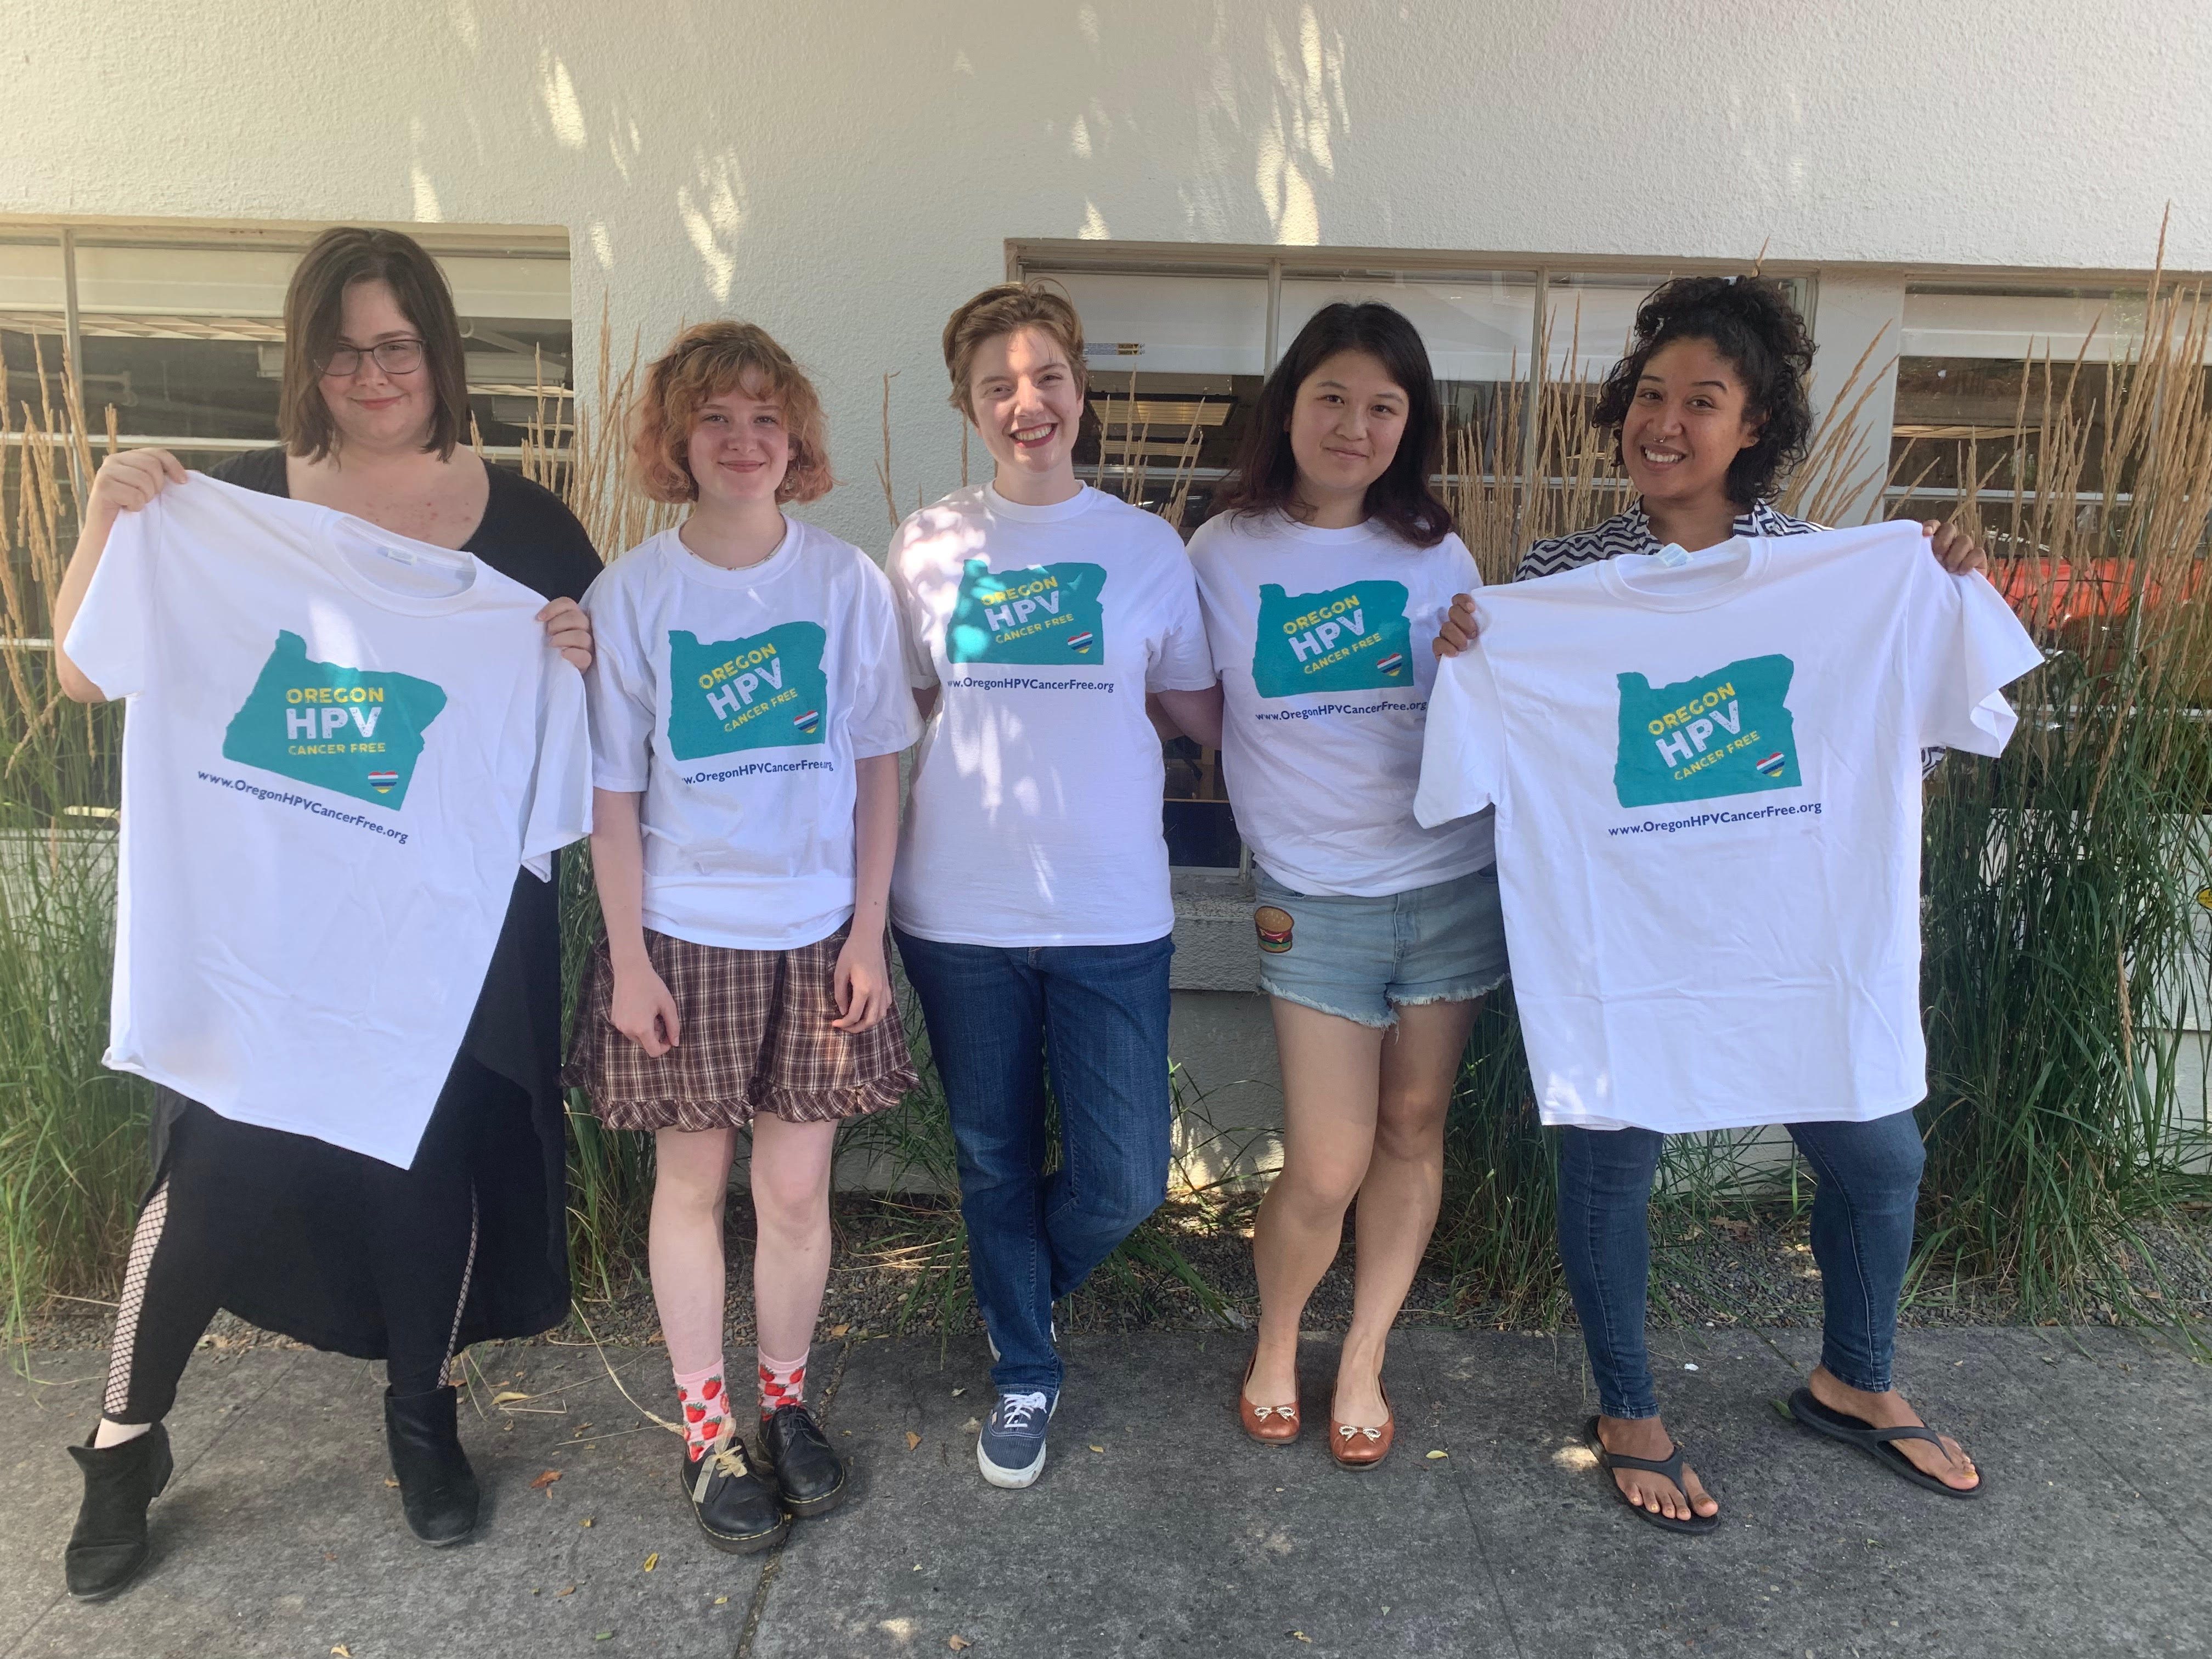 Four students and one OSBHA employee standing in front of white building wearing & holding up HPV week t-shirts